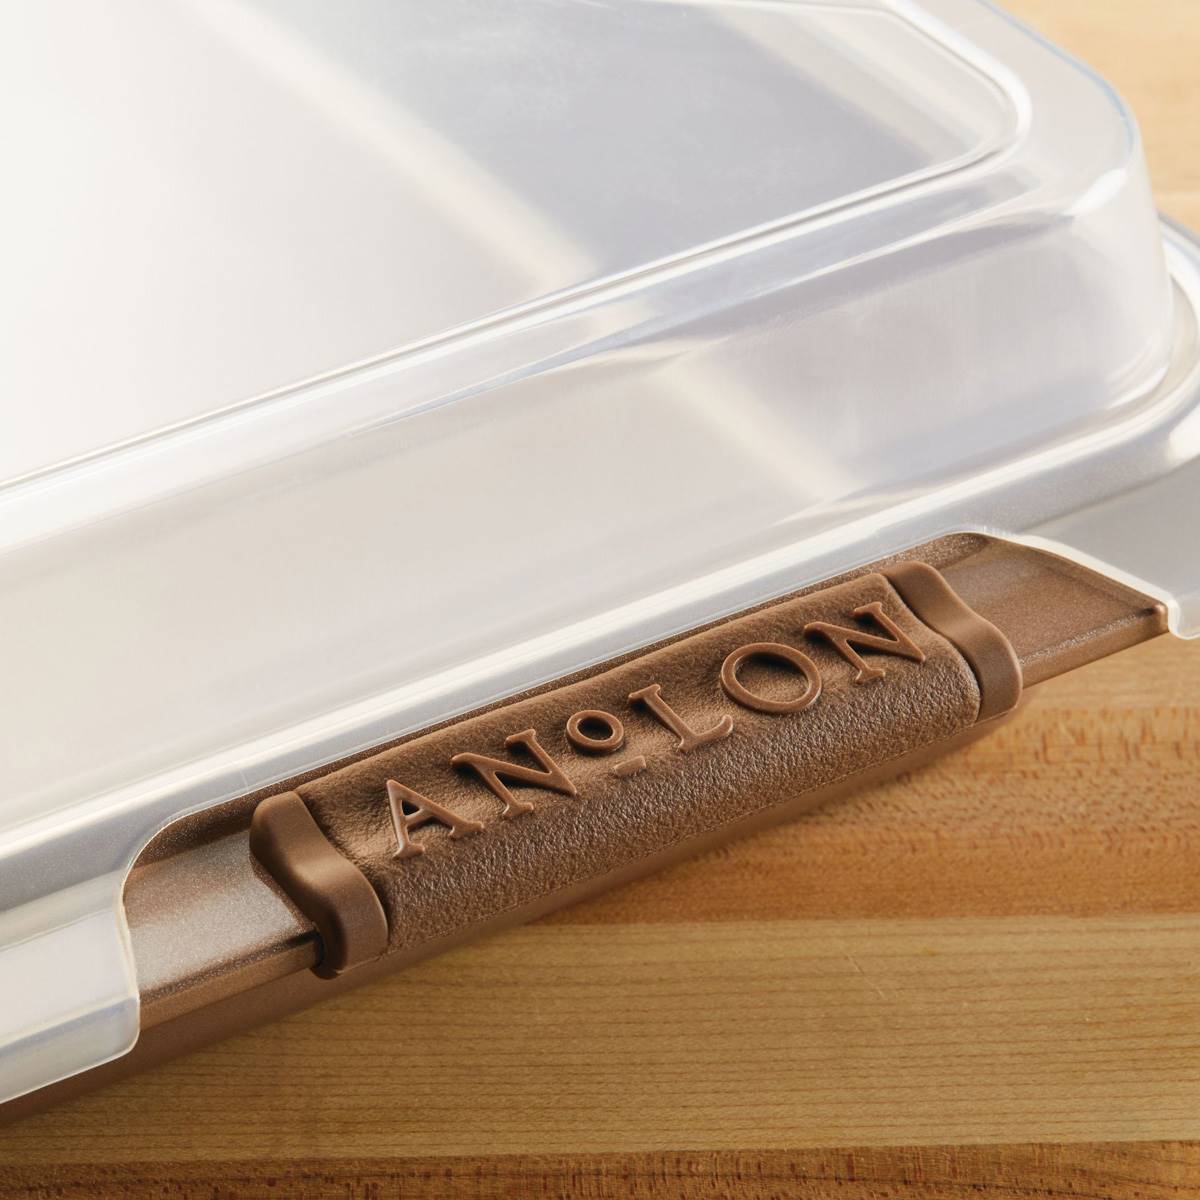 Anolon(R) Advanced Nonstick Bakeware Cake Pan &Lid & Silicone Grip